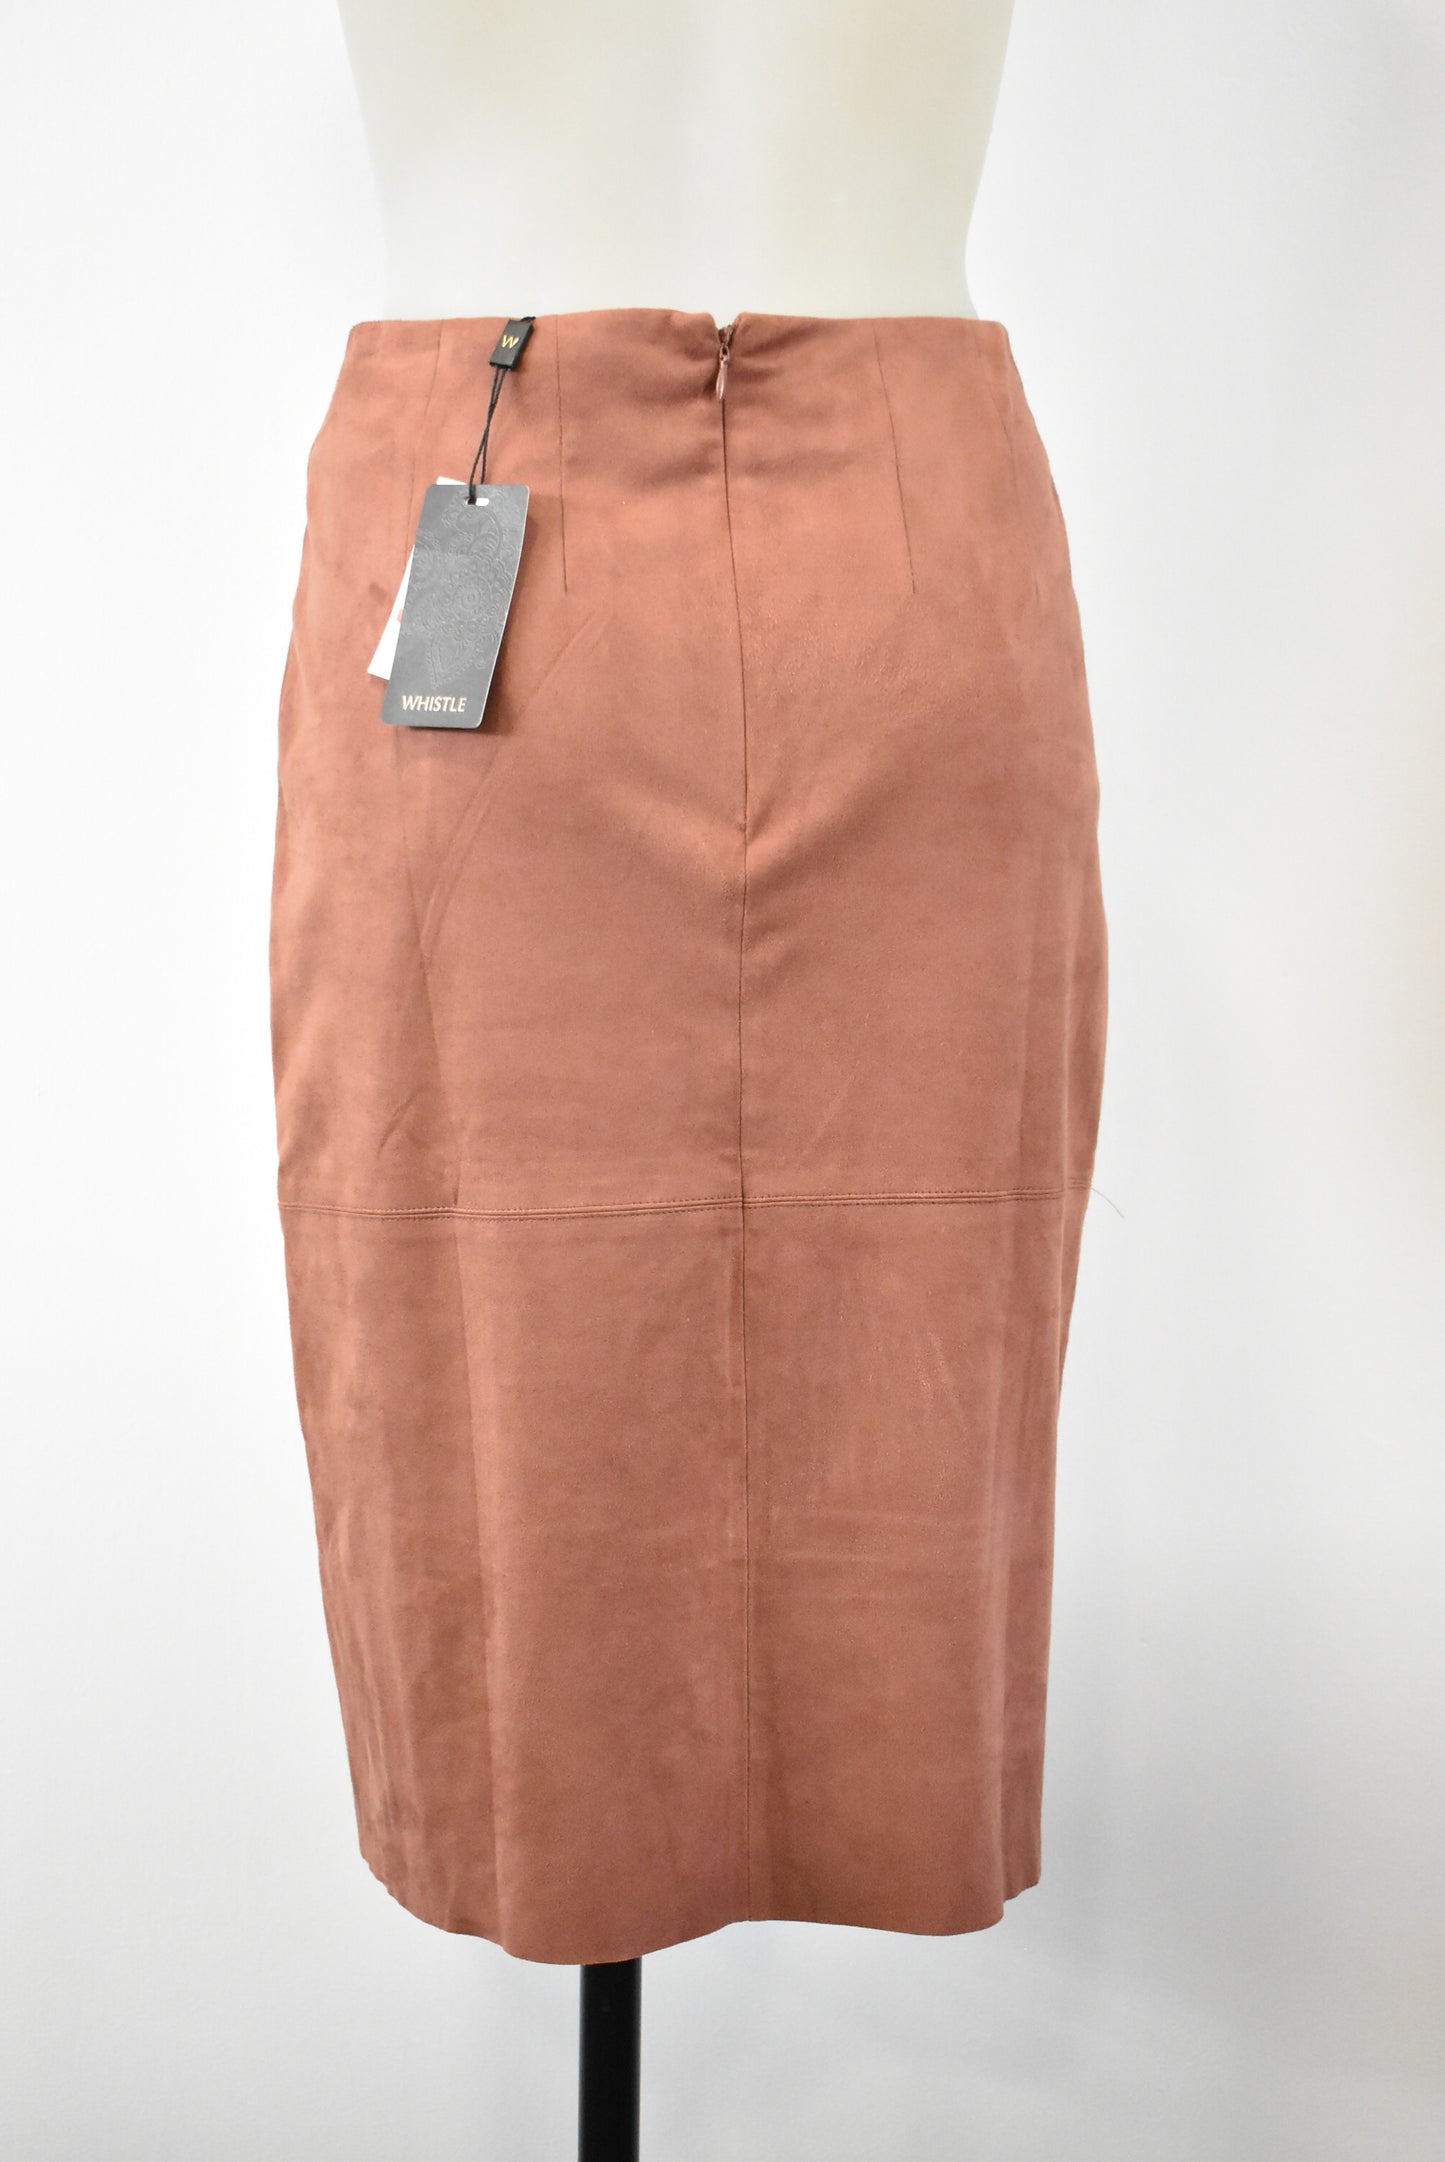 Whistle suede look skirt, 8 (NWT)